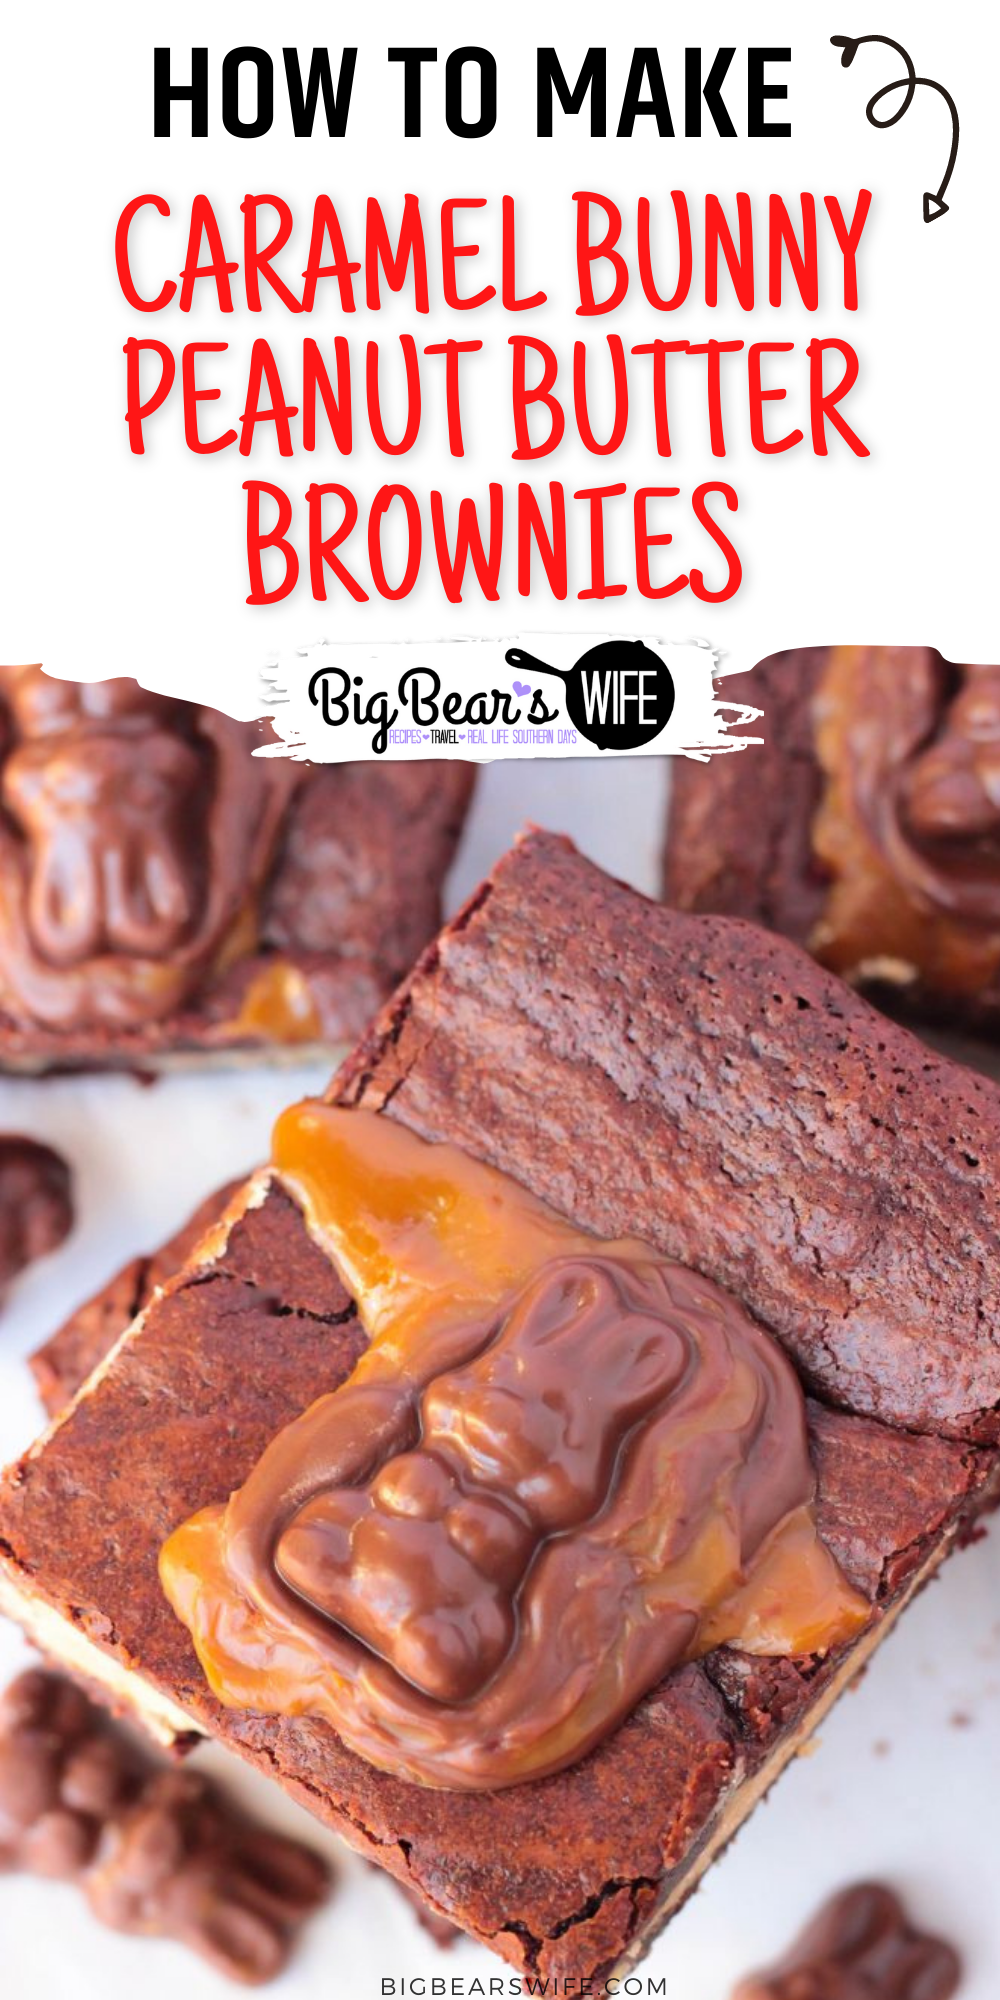 Peanut Butter Stuffed Chocolate Brownies with a chocolate caramel bunny melted on top, what’s not to love? These Caramel Bunny Peanut Butter Brownies are the perfect addition to any Easter dessert spread!

 via @bigbearswife